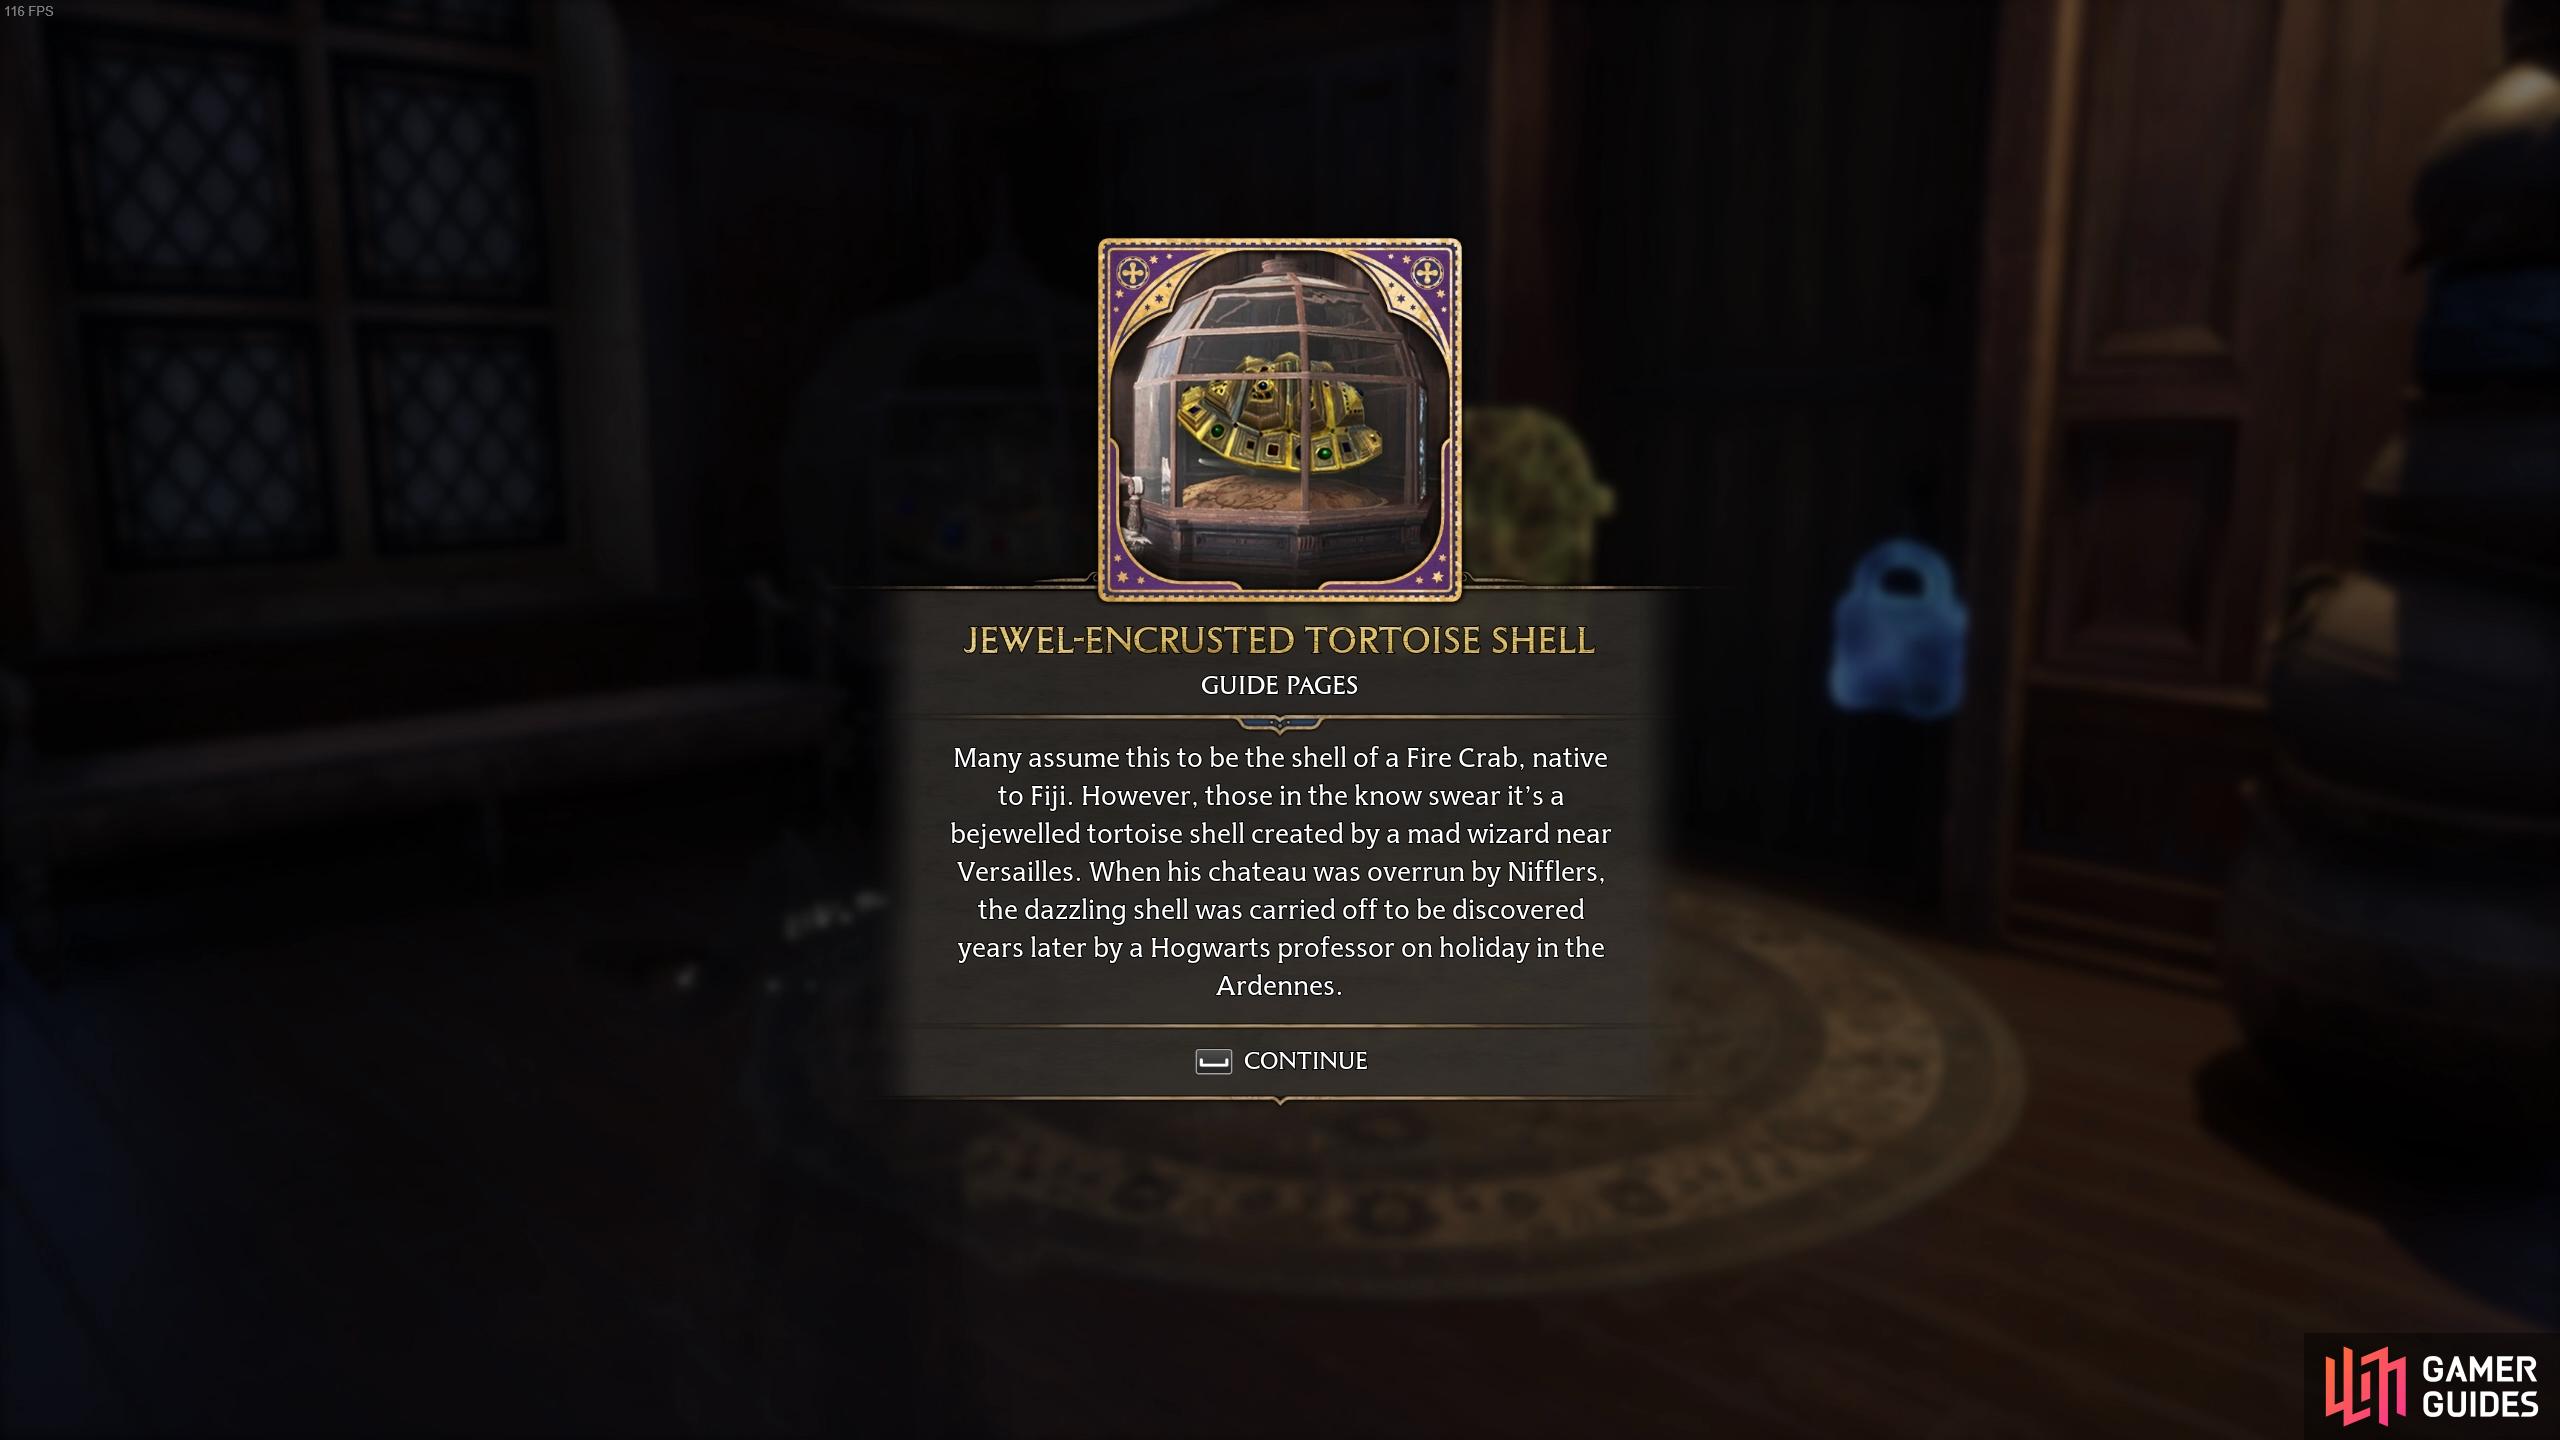 The description for the Jewel-Encrusted Tortoise Shell.